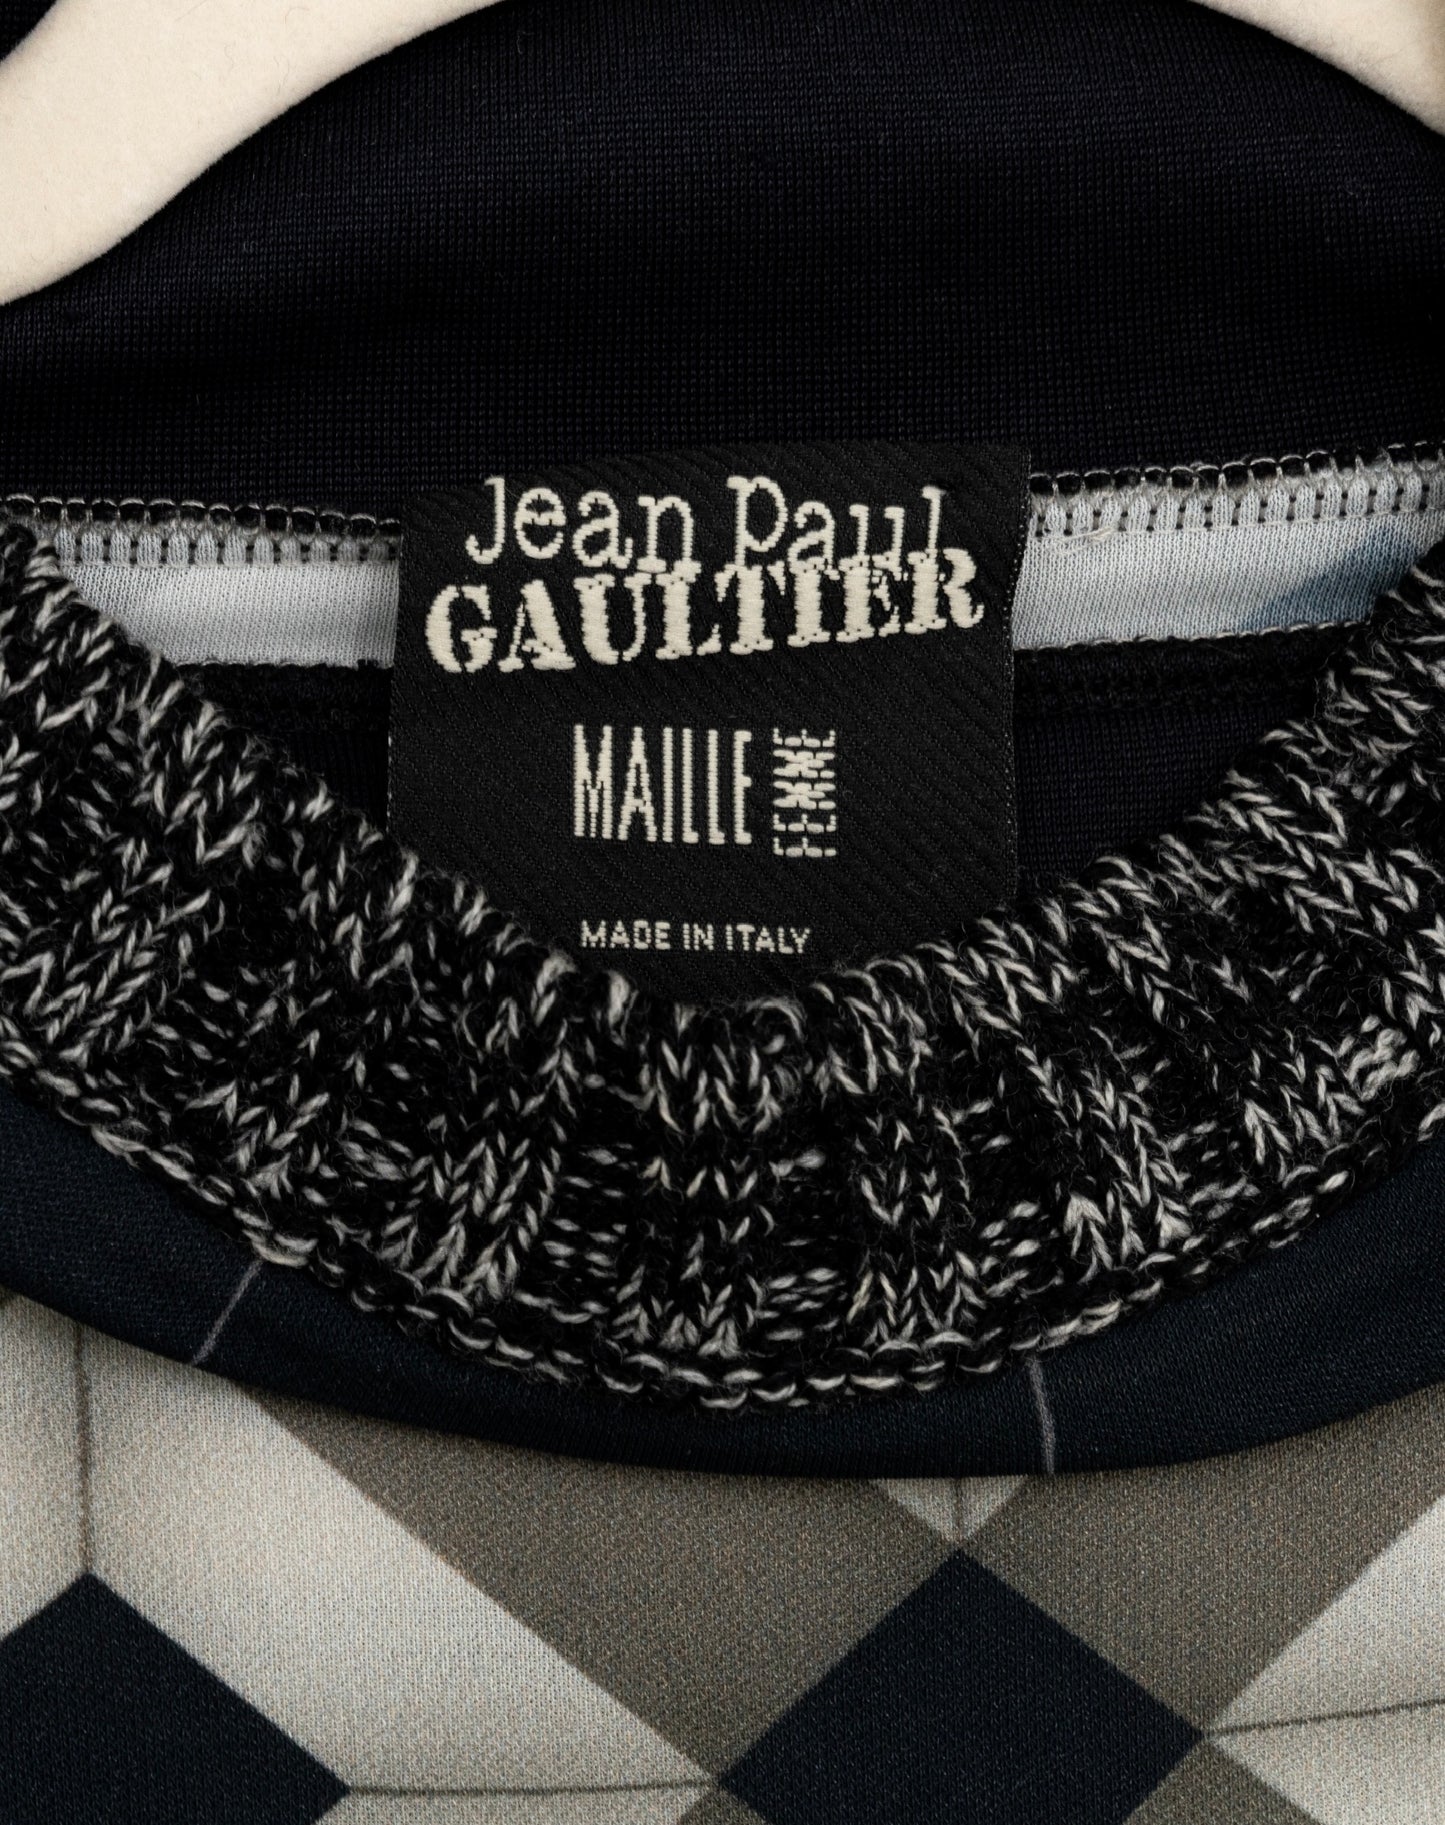 Robe - Jean Paul Gaulthier (Maille Femme)